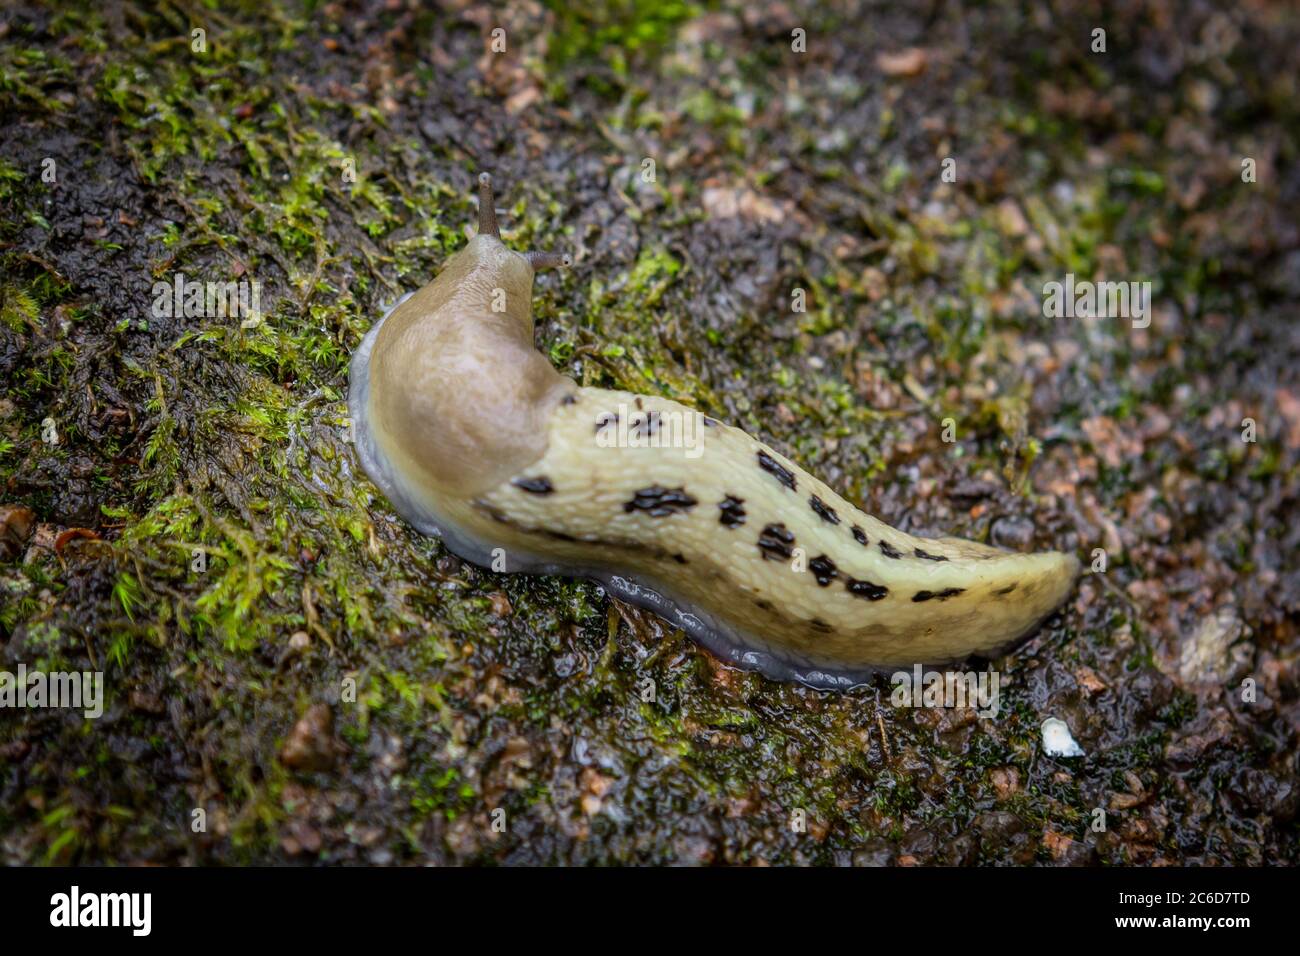 Slug on a stone overgrown with moss. View from above. Stock Photo